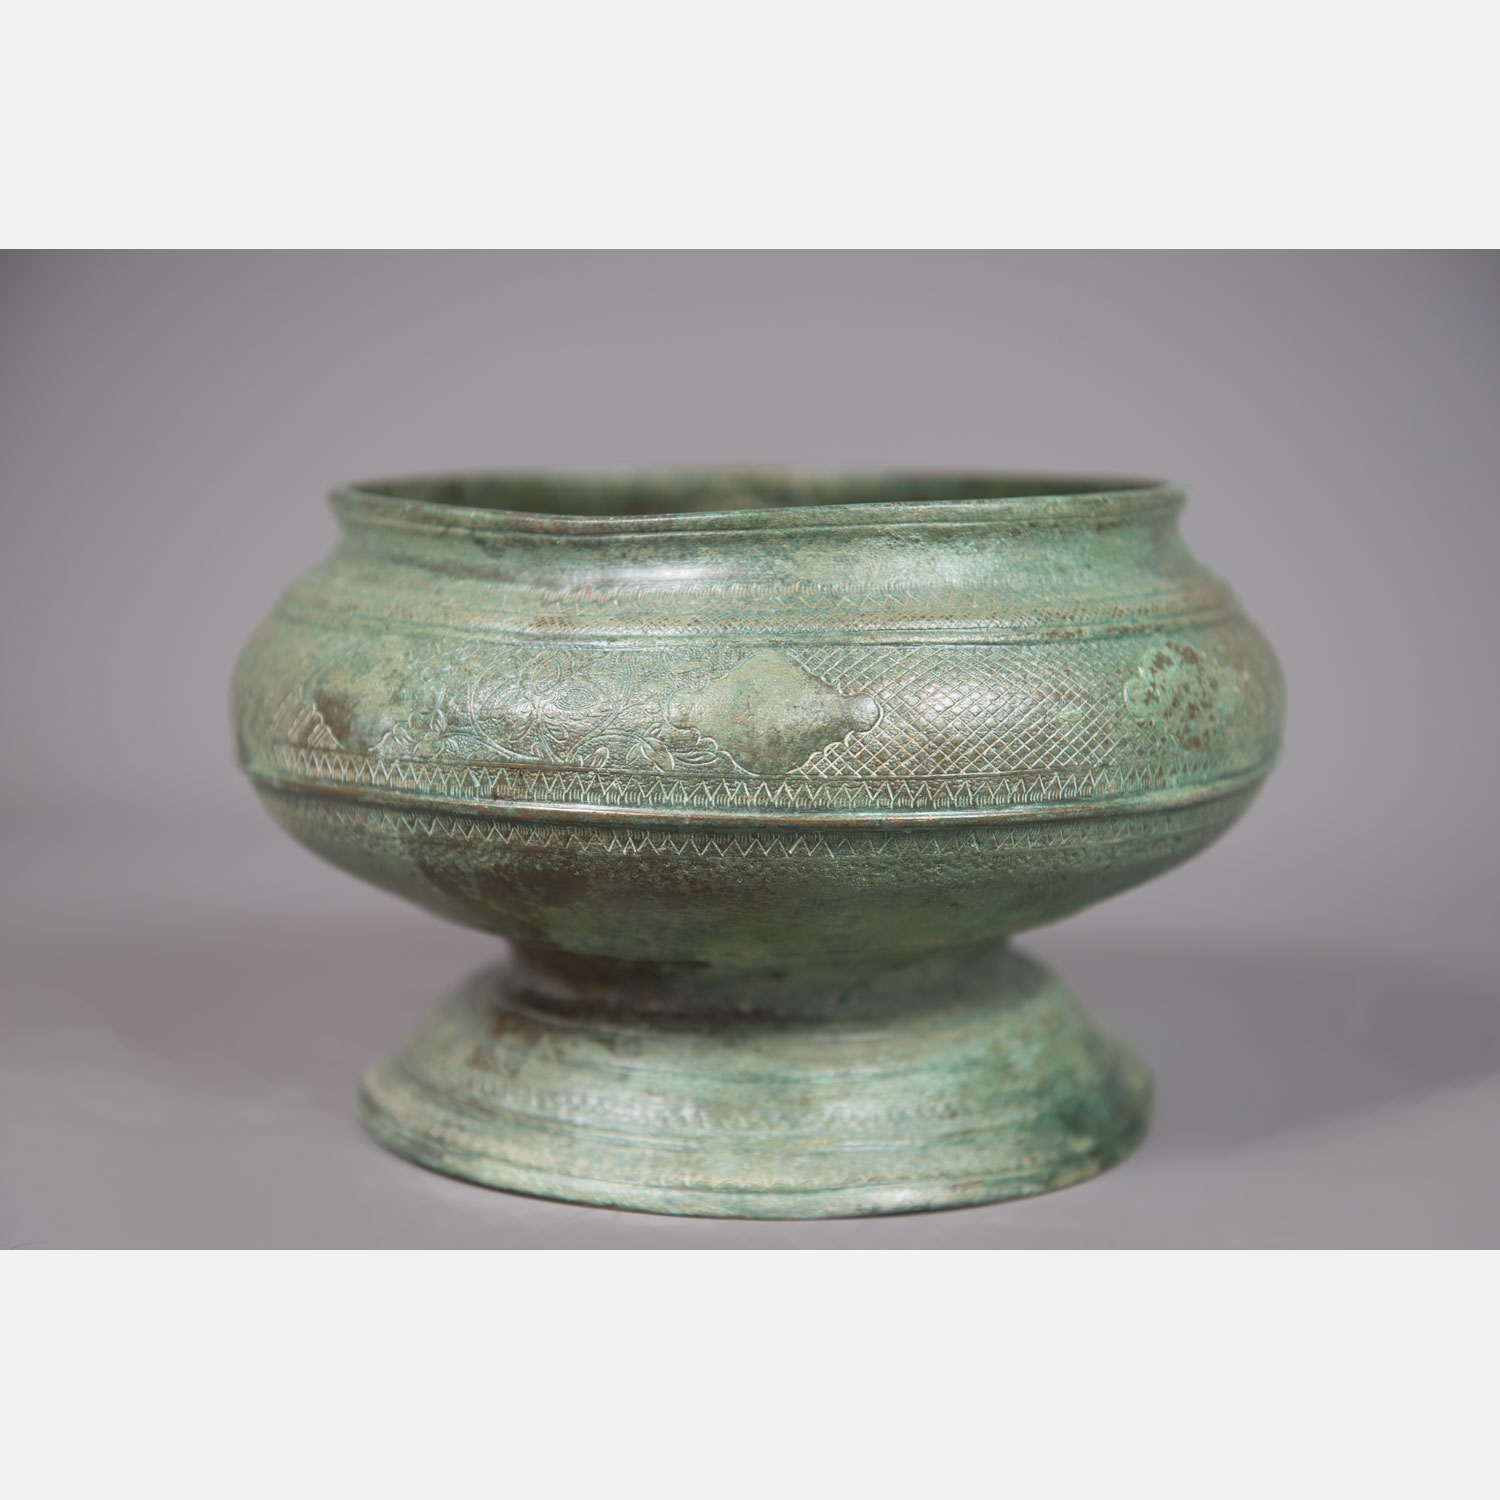 Early oriental bronce bowl - Image 3 of 3